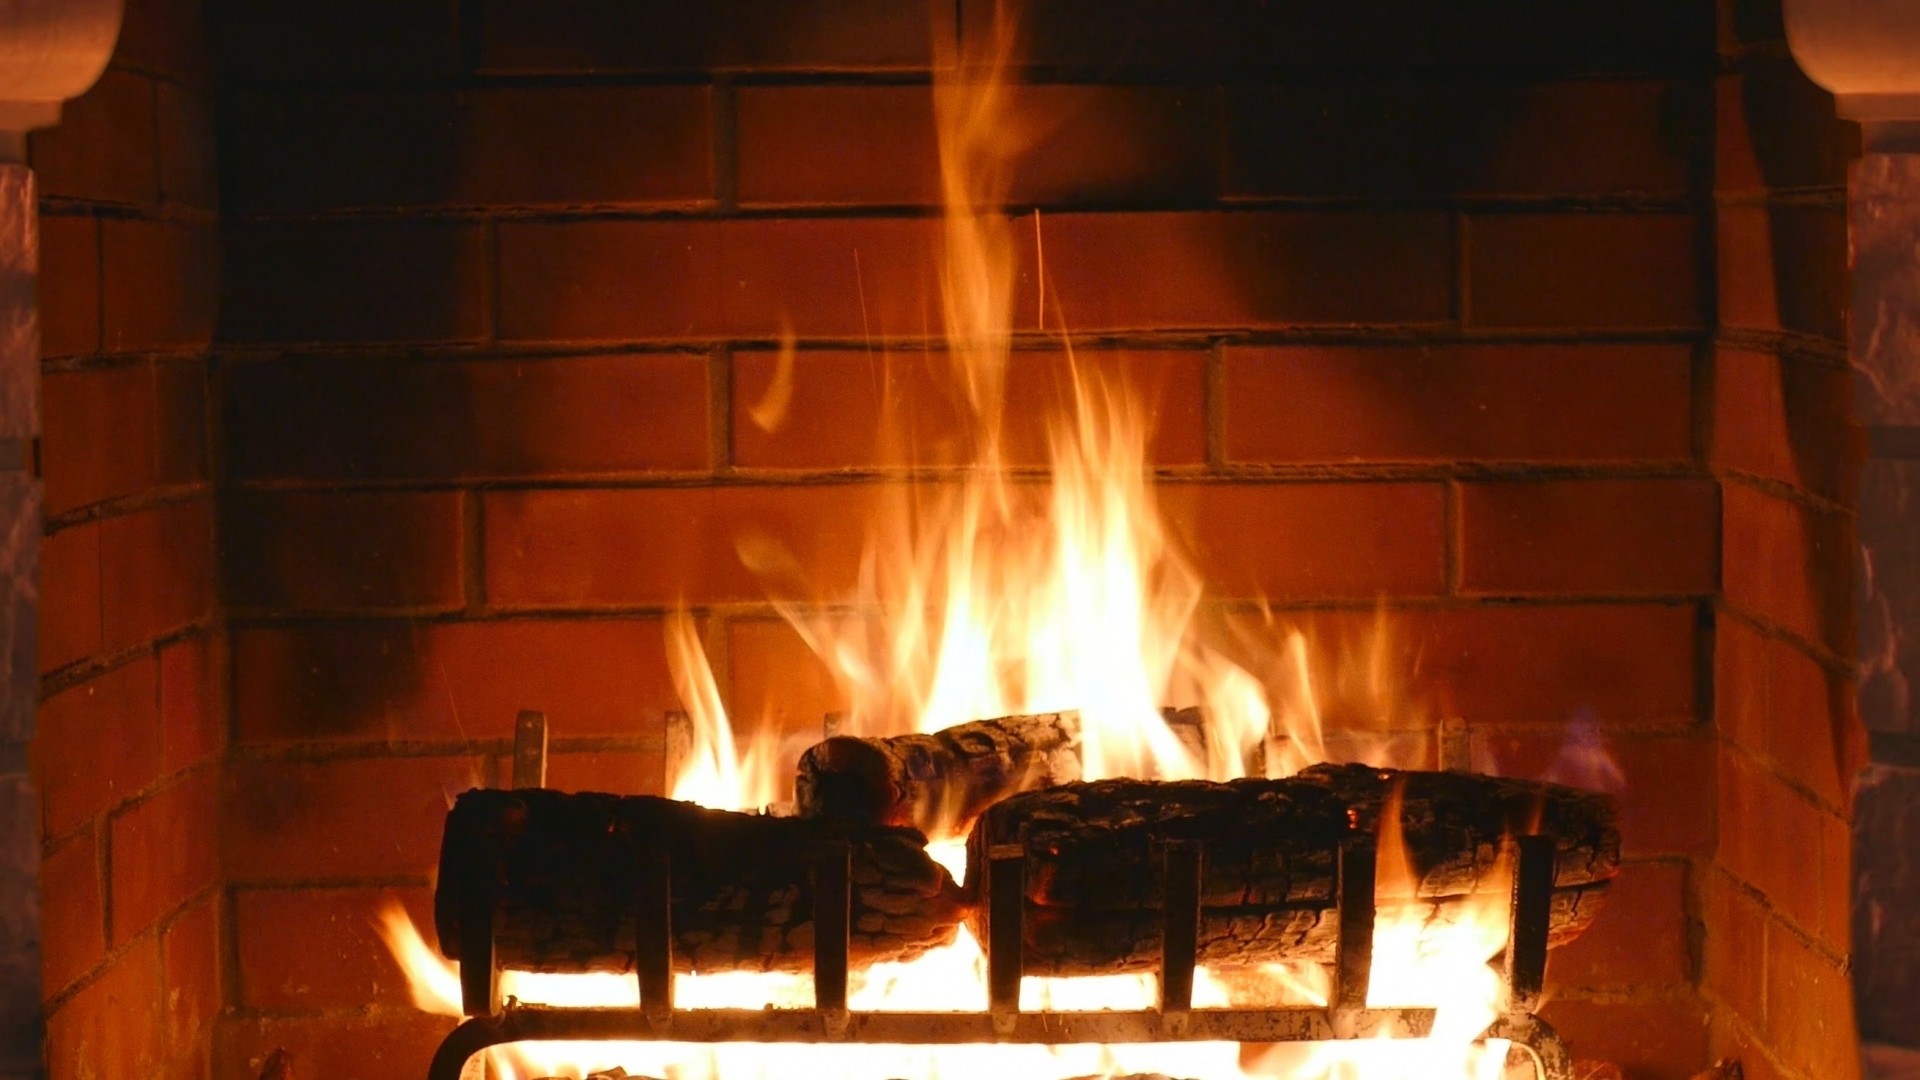 Fireplace Wallpaper Picture hd